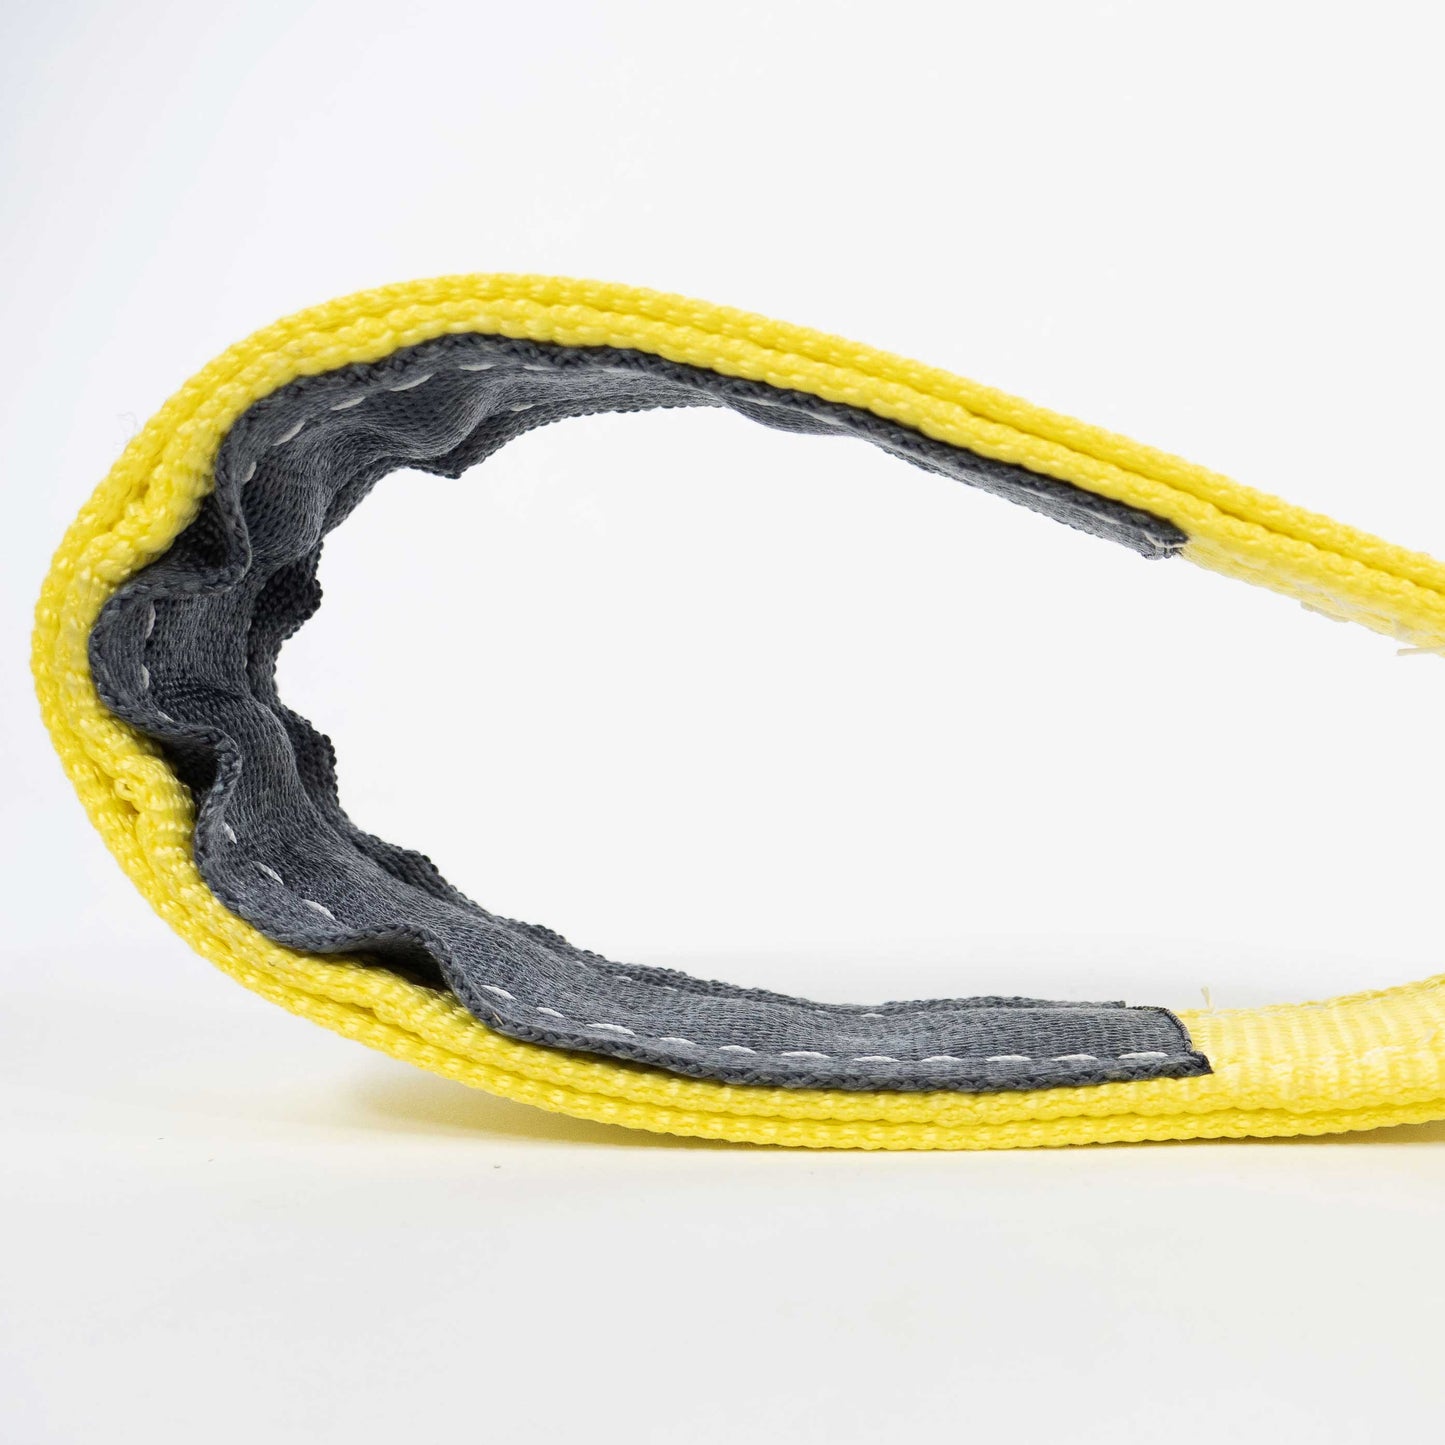 2" x 30' Heavy Duty Recovery Strap with Reinforced Cordura Eyes - 4 Ply | 27,500 WLL